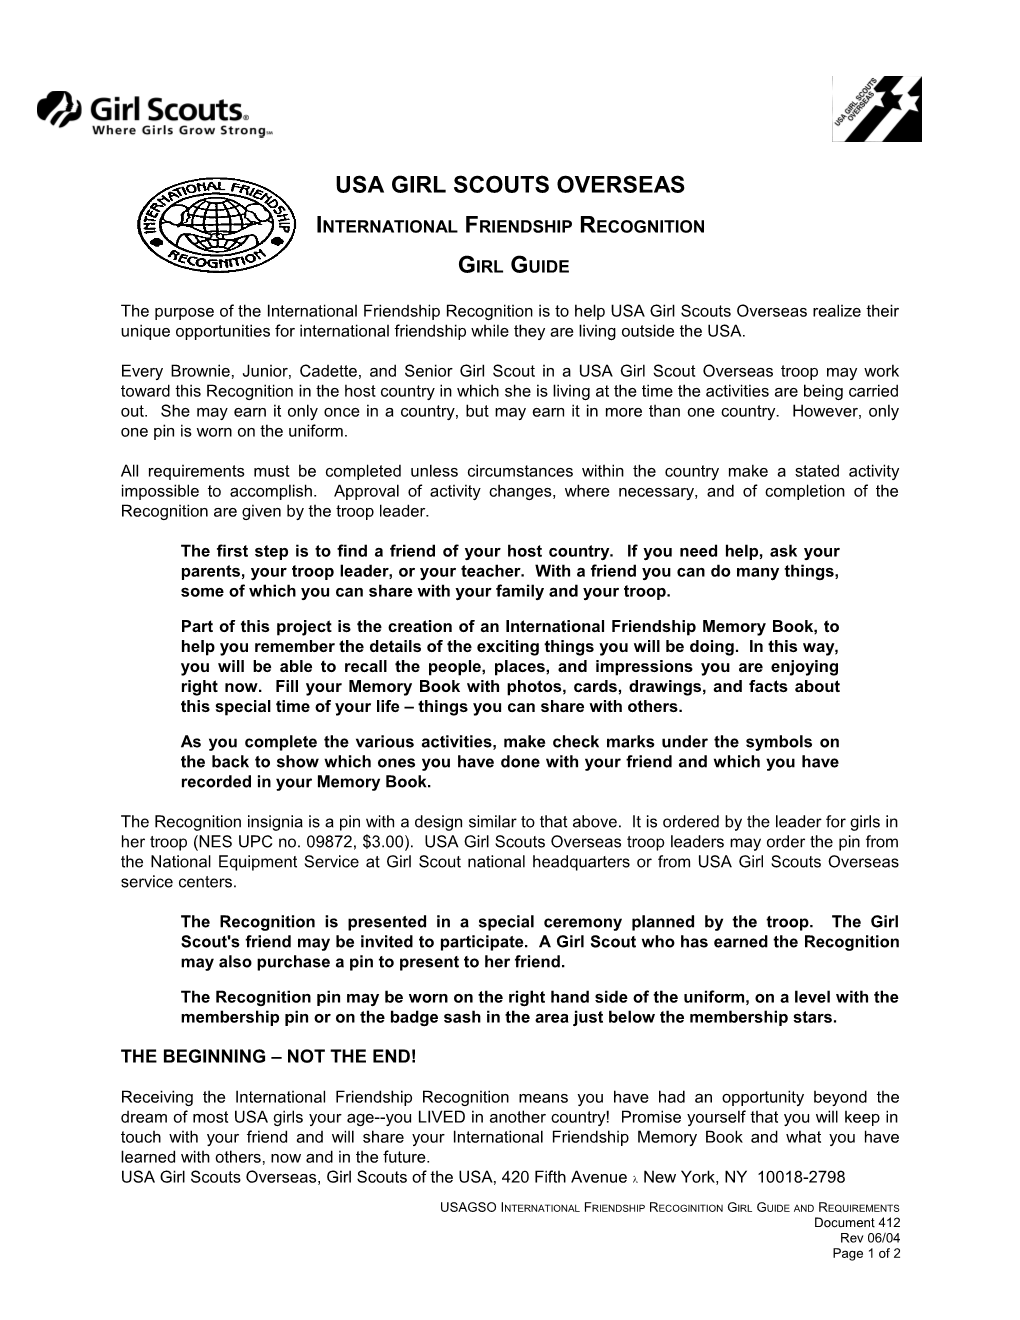 Document 412 Int'l Friendship Recognition Girl Guide and Requirements